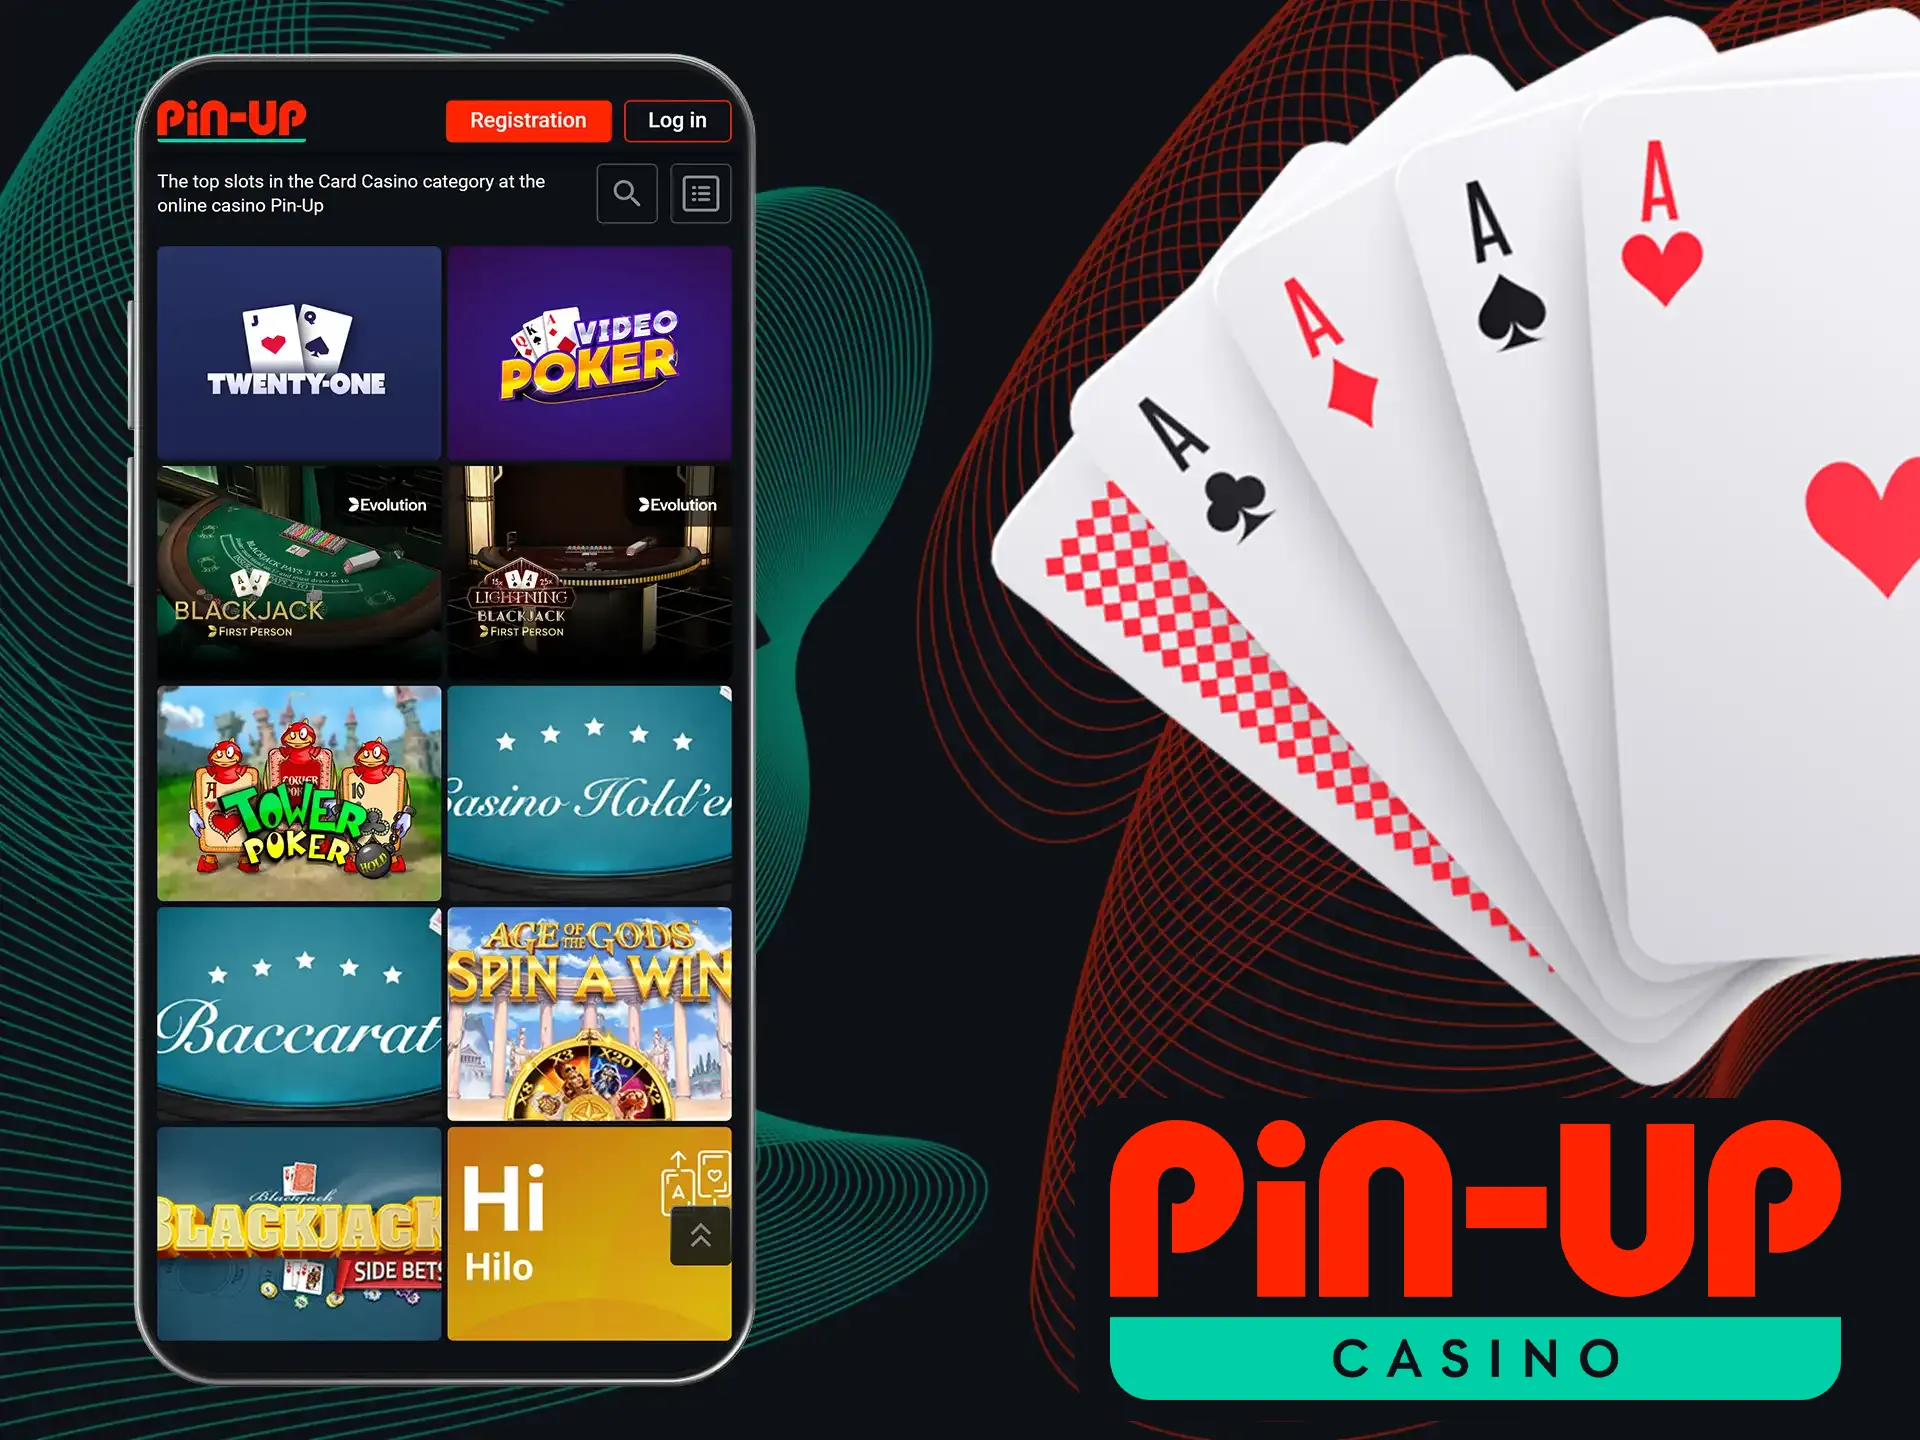 At Pin-Up Casino, you can enjoy playing Baccarat, where you need to place your bets on one of three possible results.